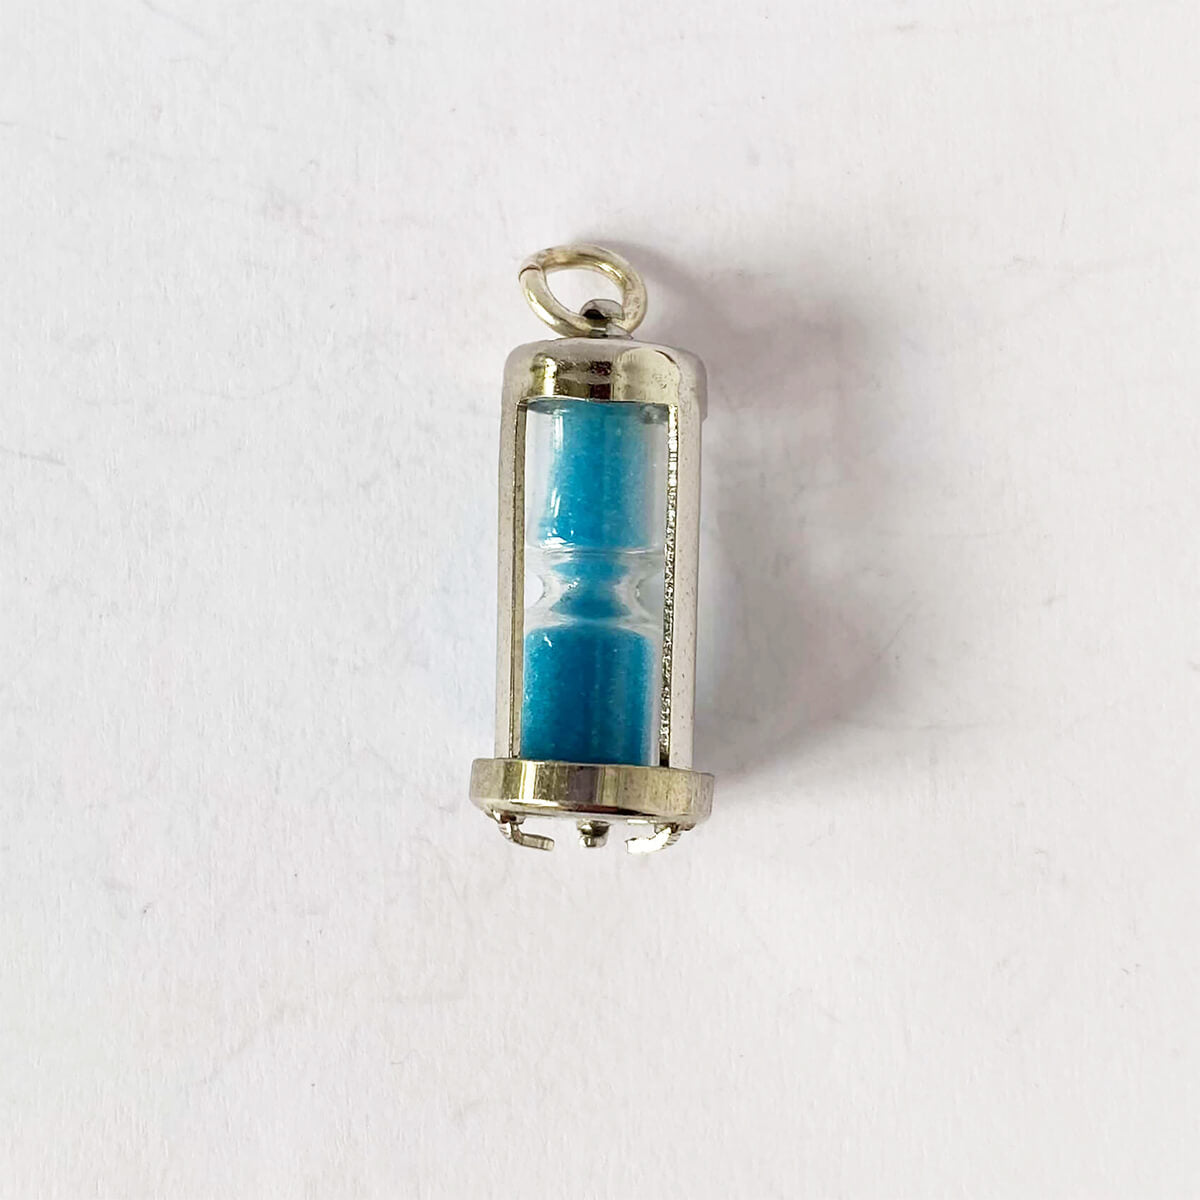 Sterling silver vintage blue hourglass charm from Charmarama